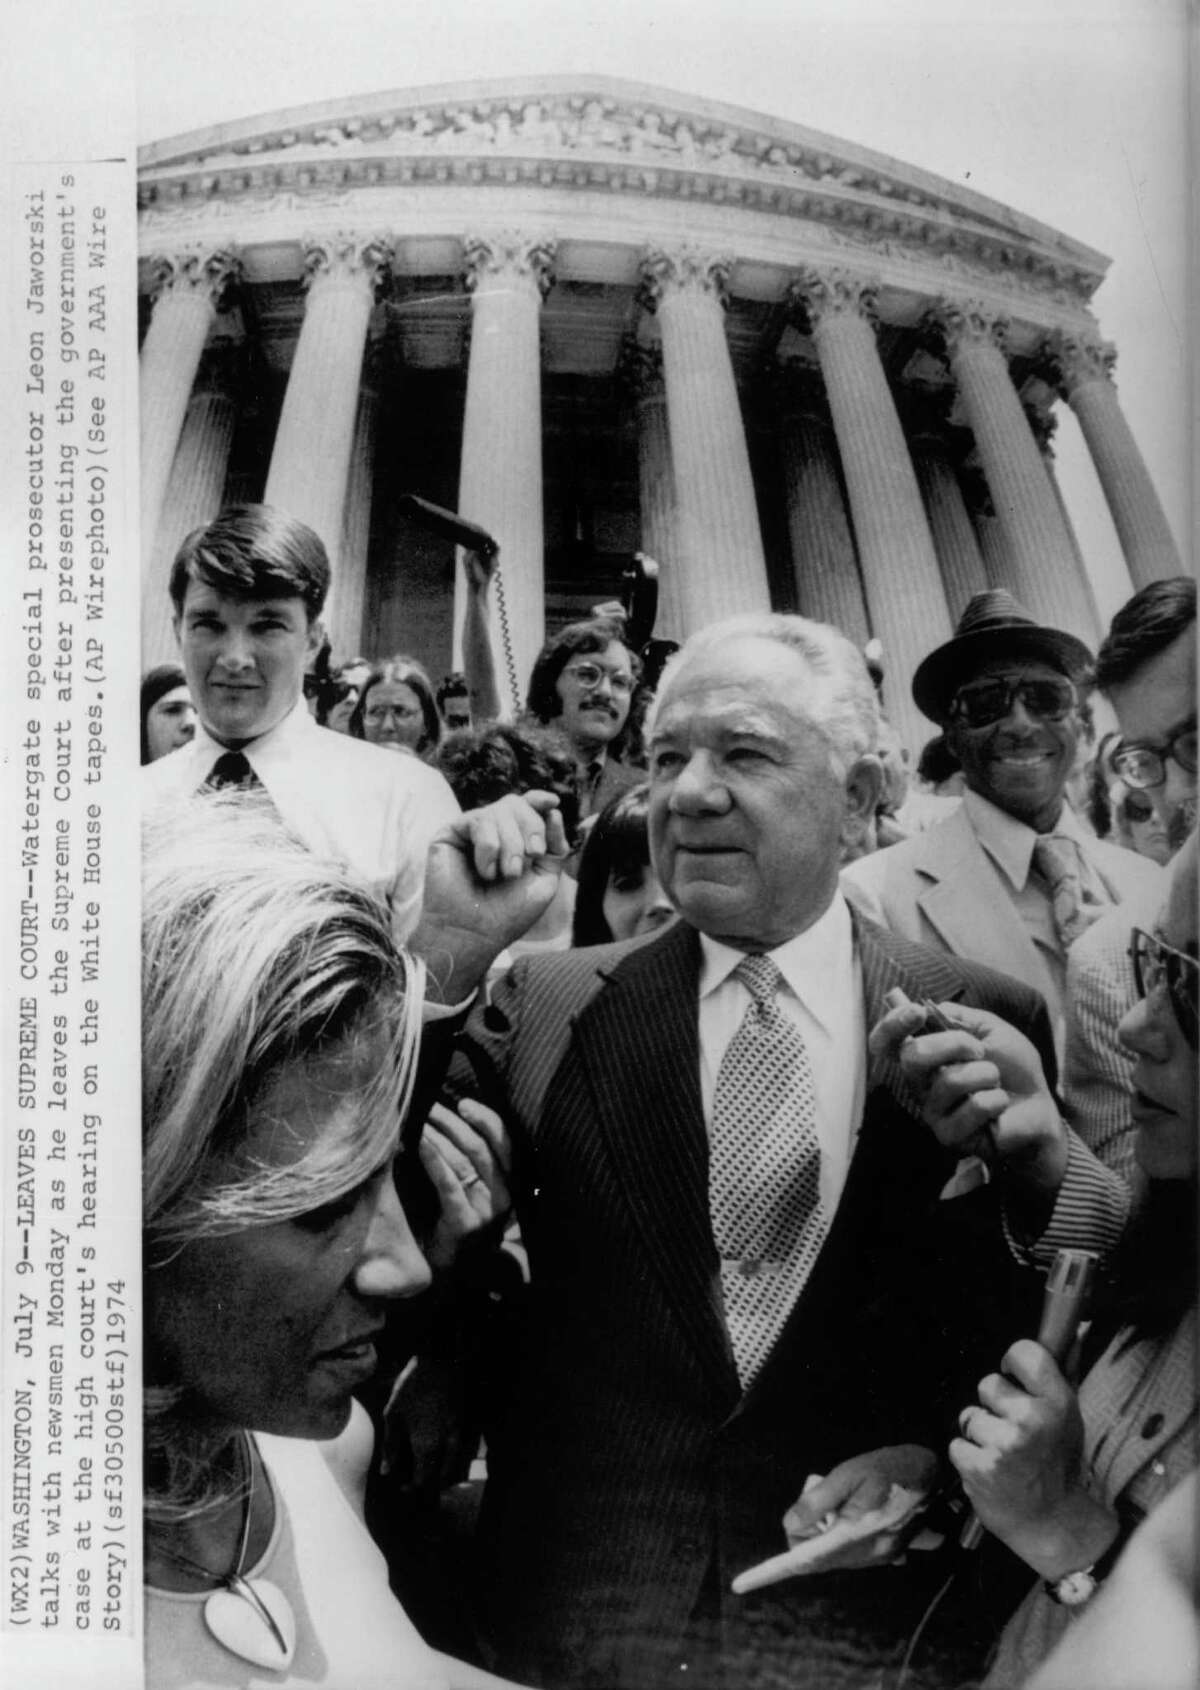 Fulbright & Jaworski's Leon Jaworski, outside the U.S. Supreme Court building in 1974, was special prosecutor in the Watergate scandal.